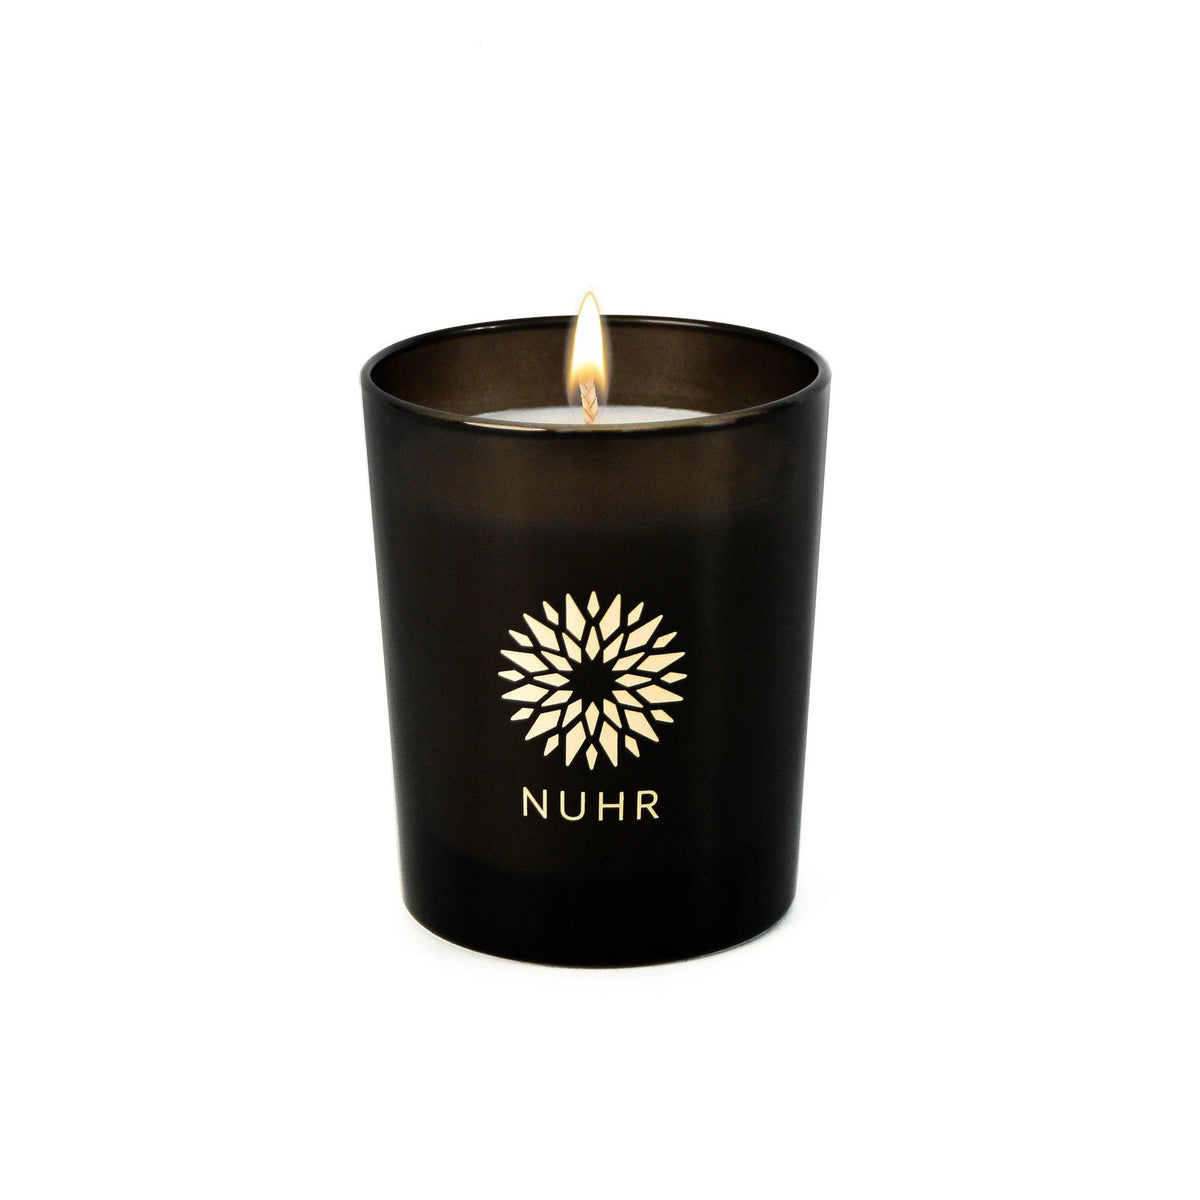 Nuhr Oud Woods Aroma Candle